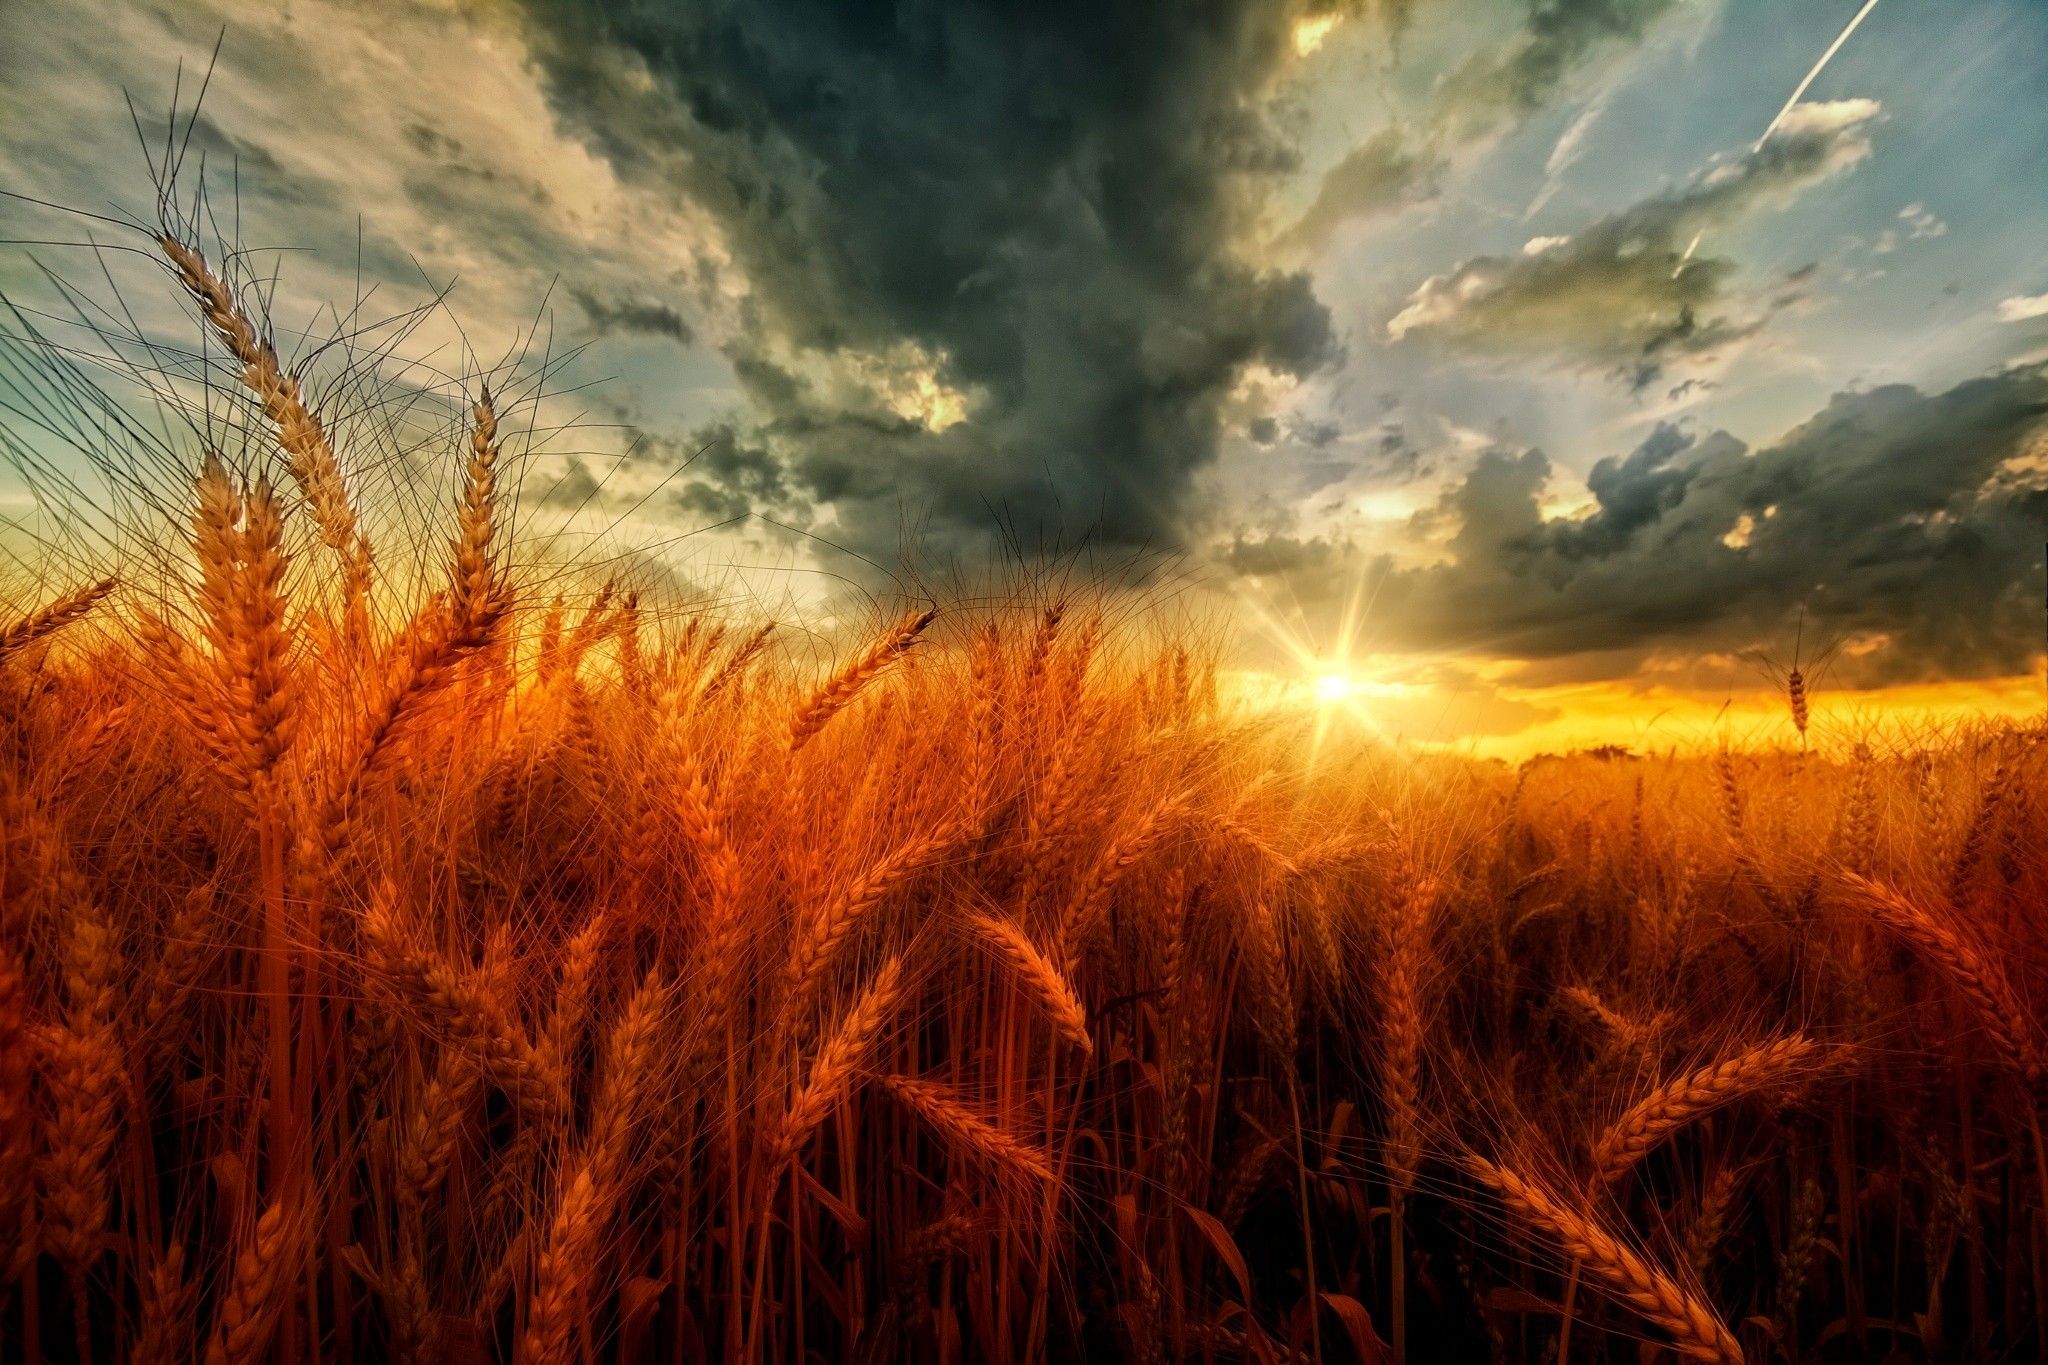 Sunset and Dark Clouds over Wheat Field HD Wallpaper. Background